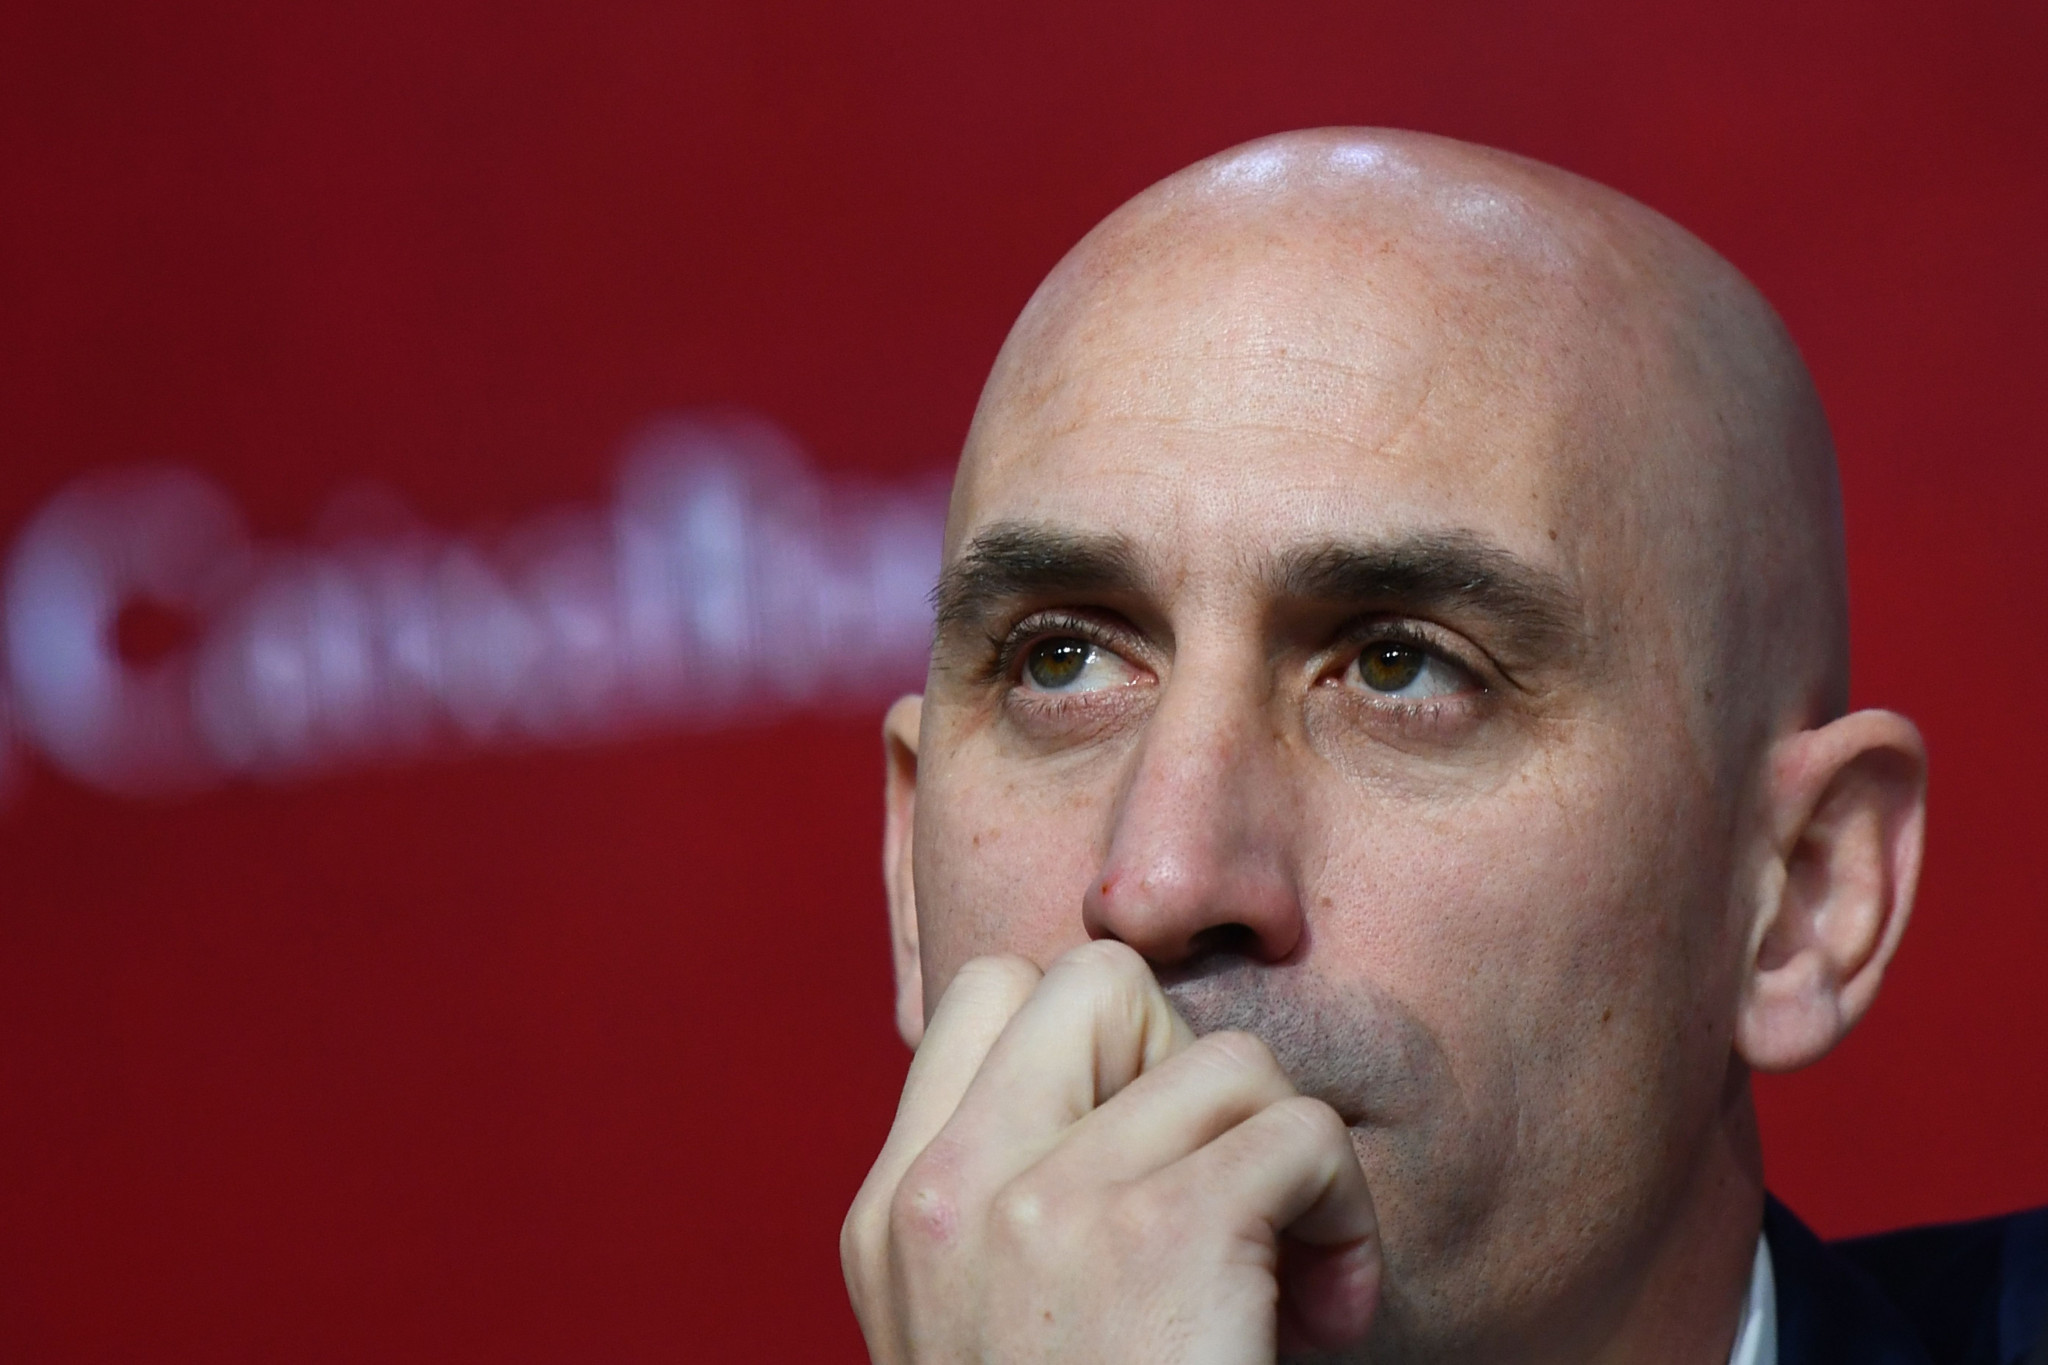 Luis Rubiales is set to secure a second term as Royal Spanish Football Federation President ©Getty Images